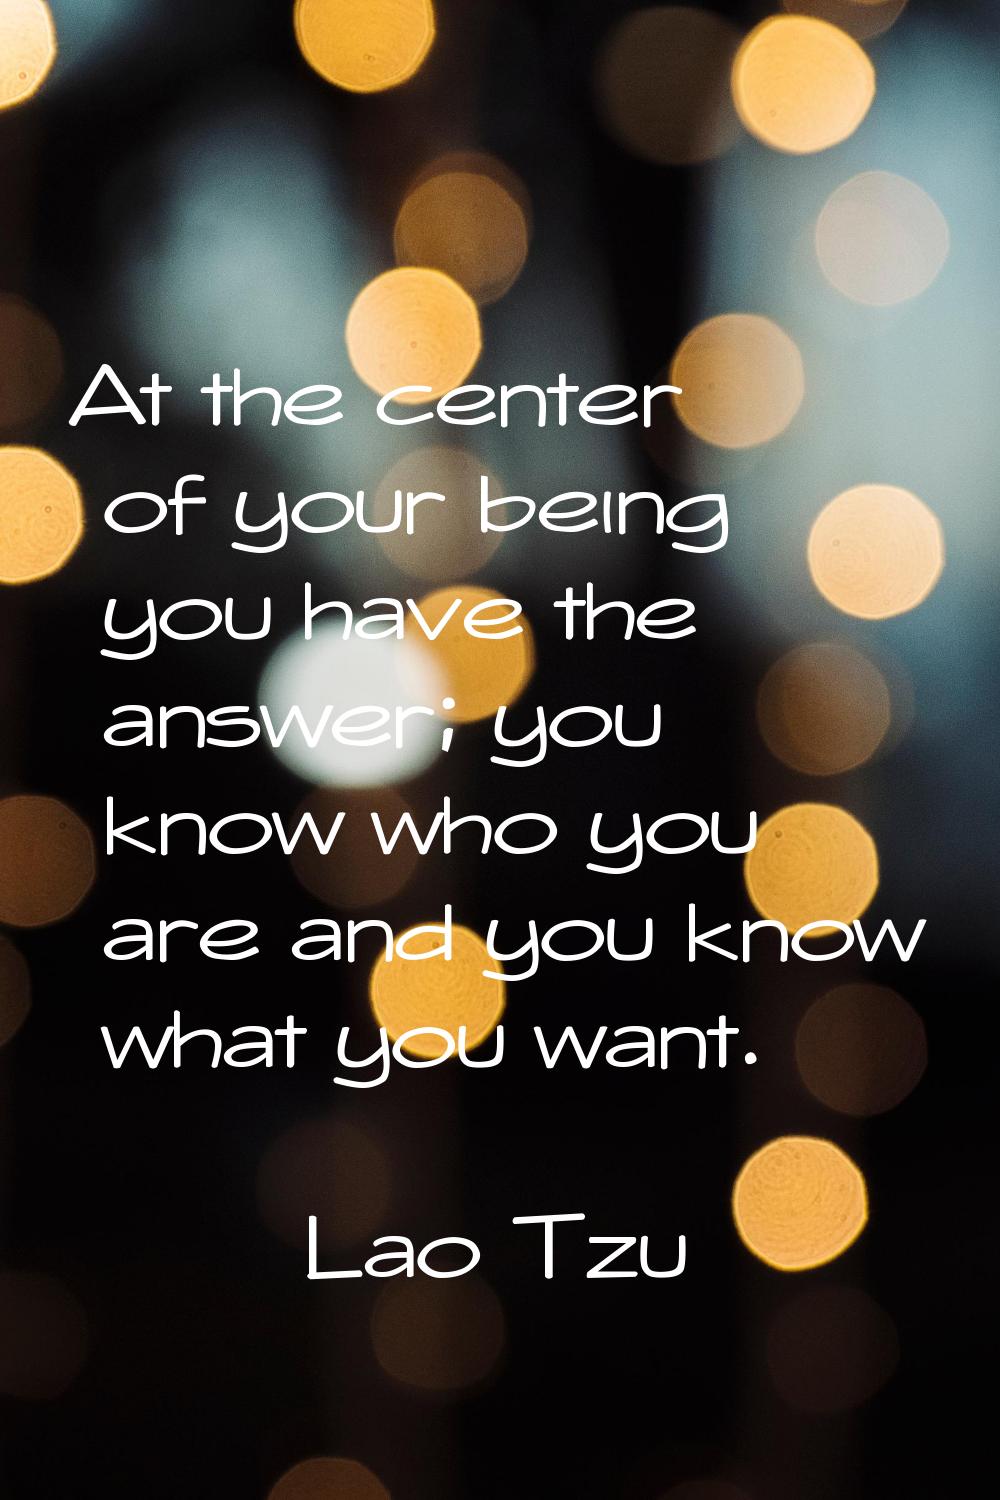 At the center of your being you have the answer; you know who you are and you know what you want.